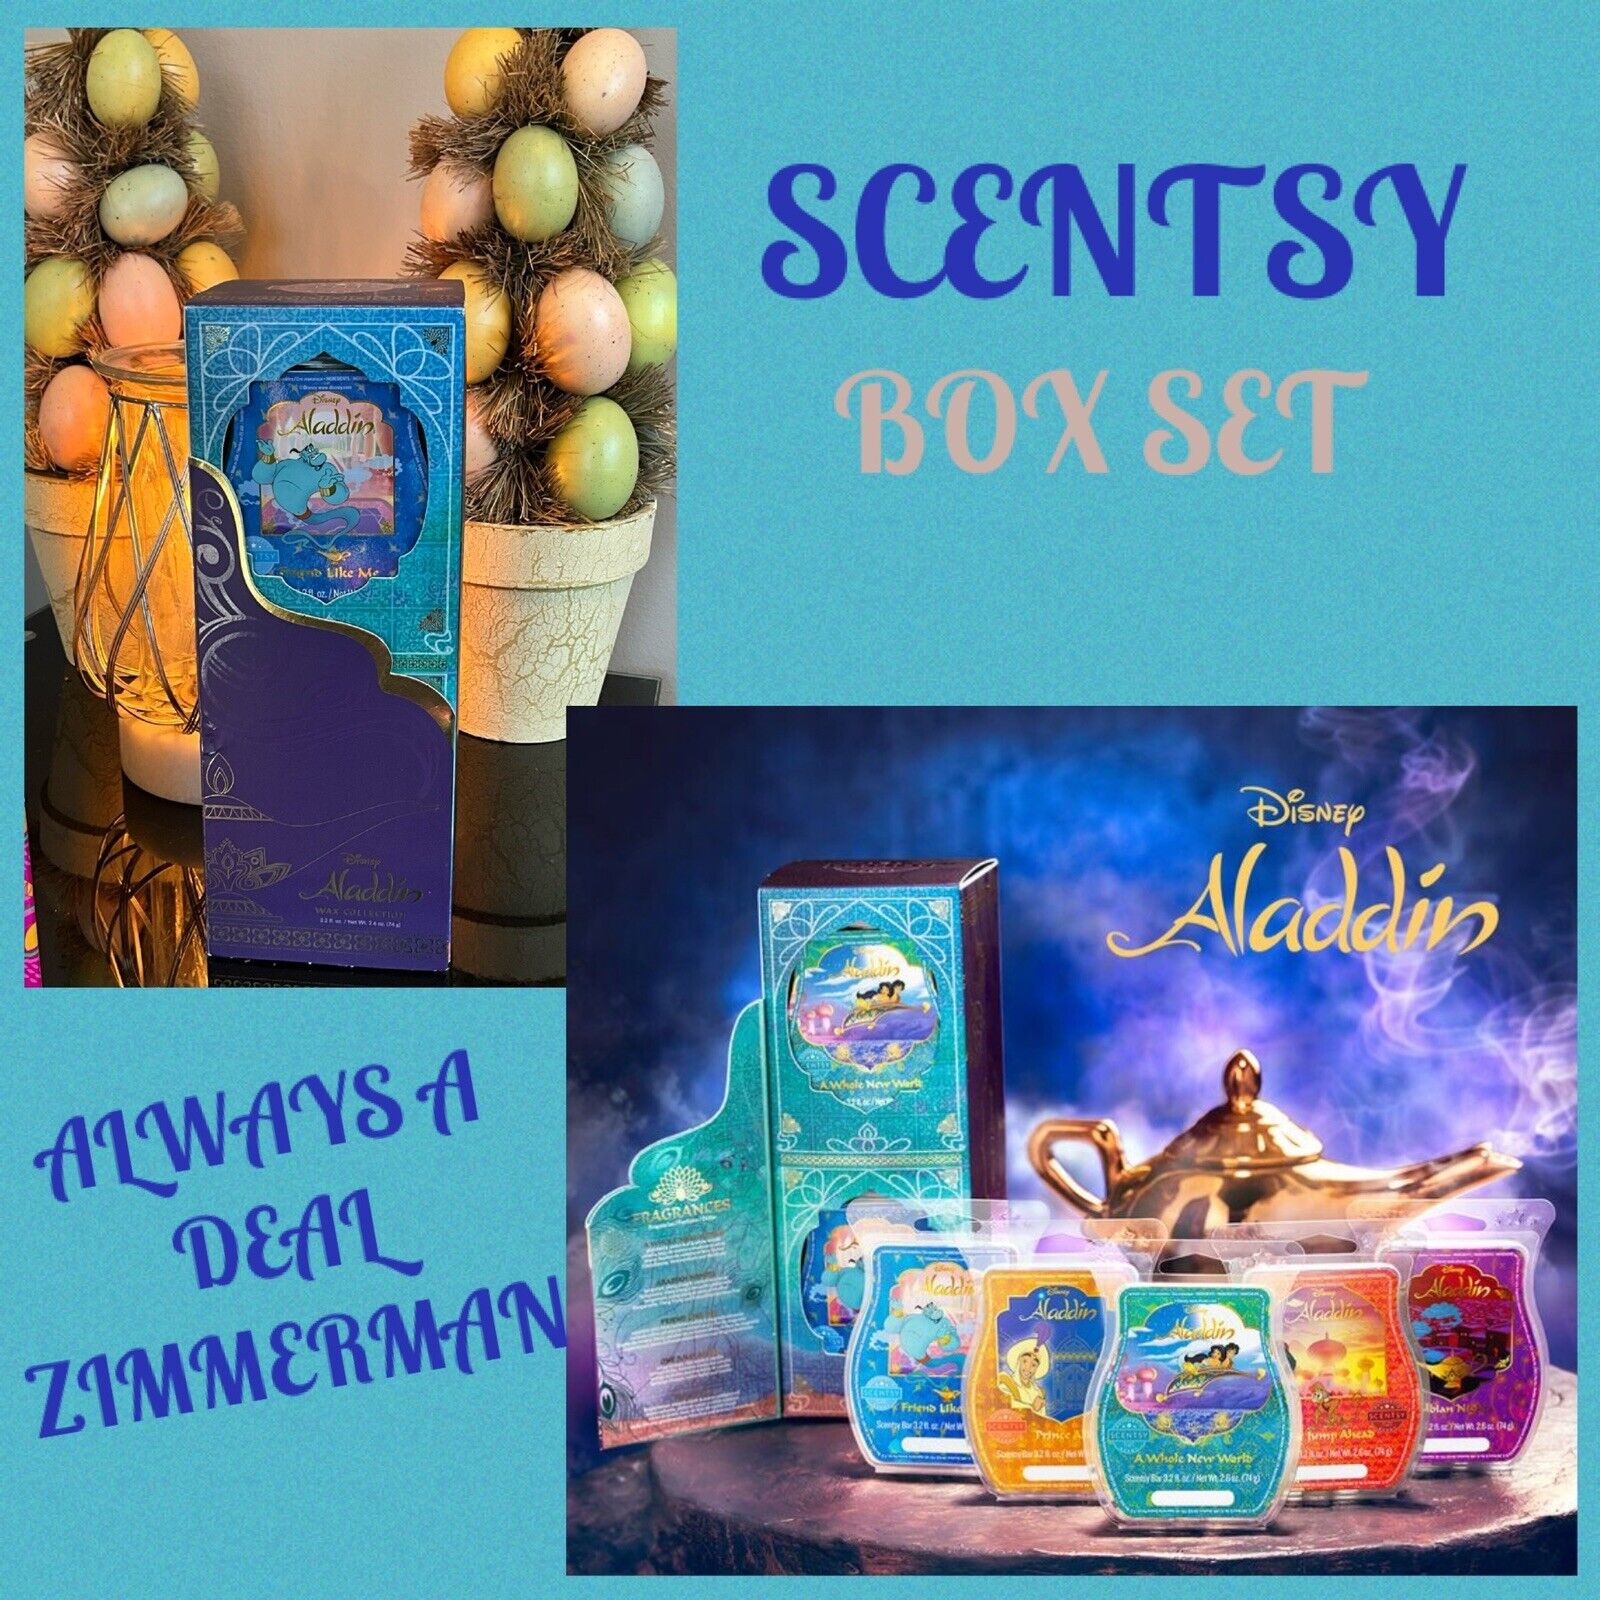 SCENTSY ~ Disney Aladdin Wax Collection Limited Edition Set of 5 - NEW IN BOX